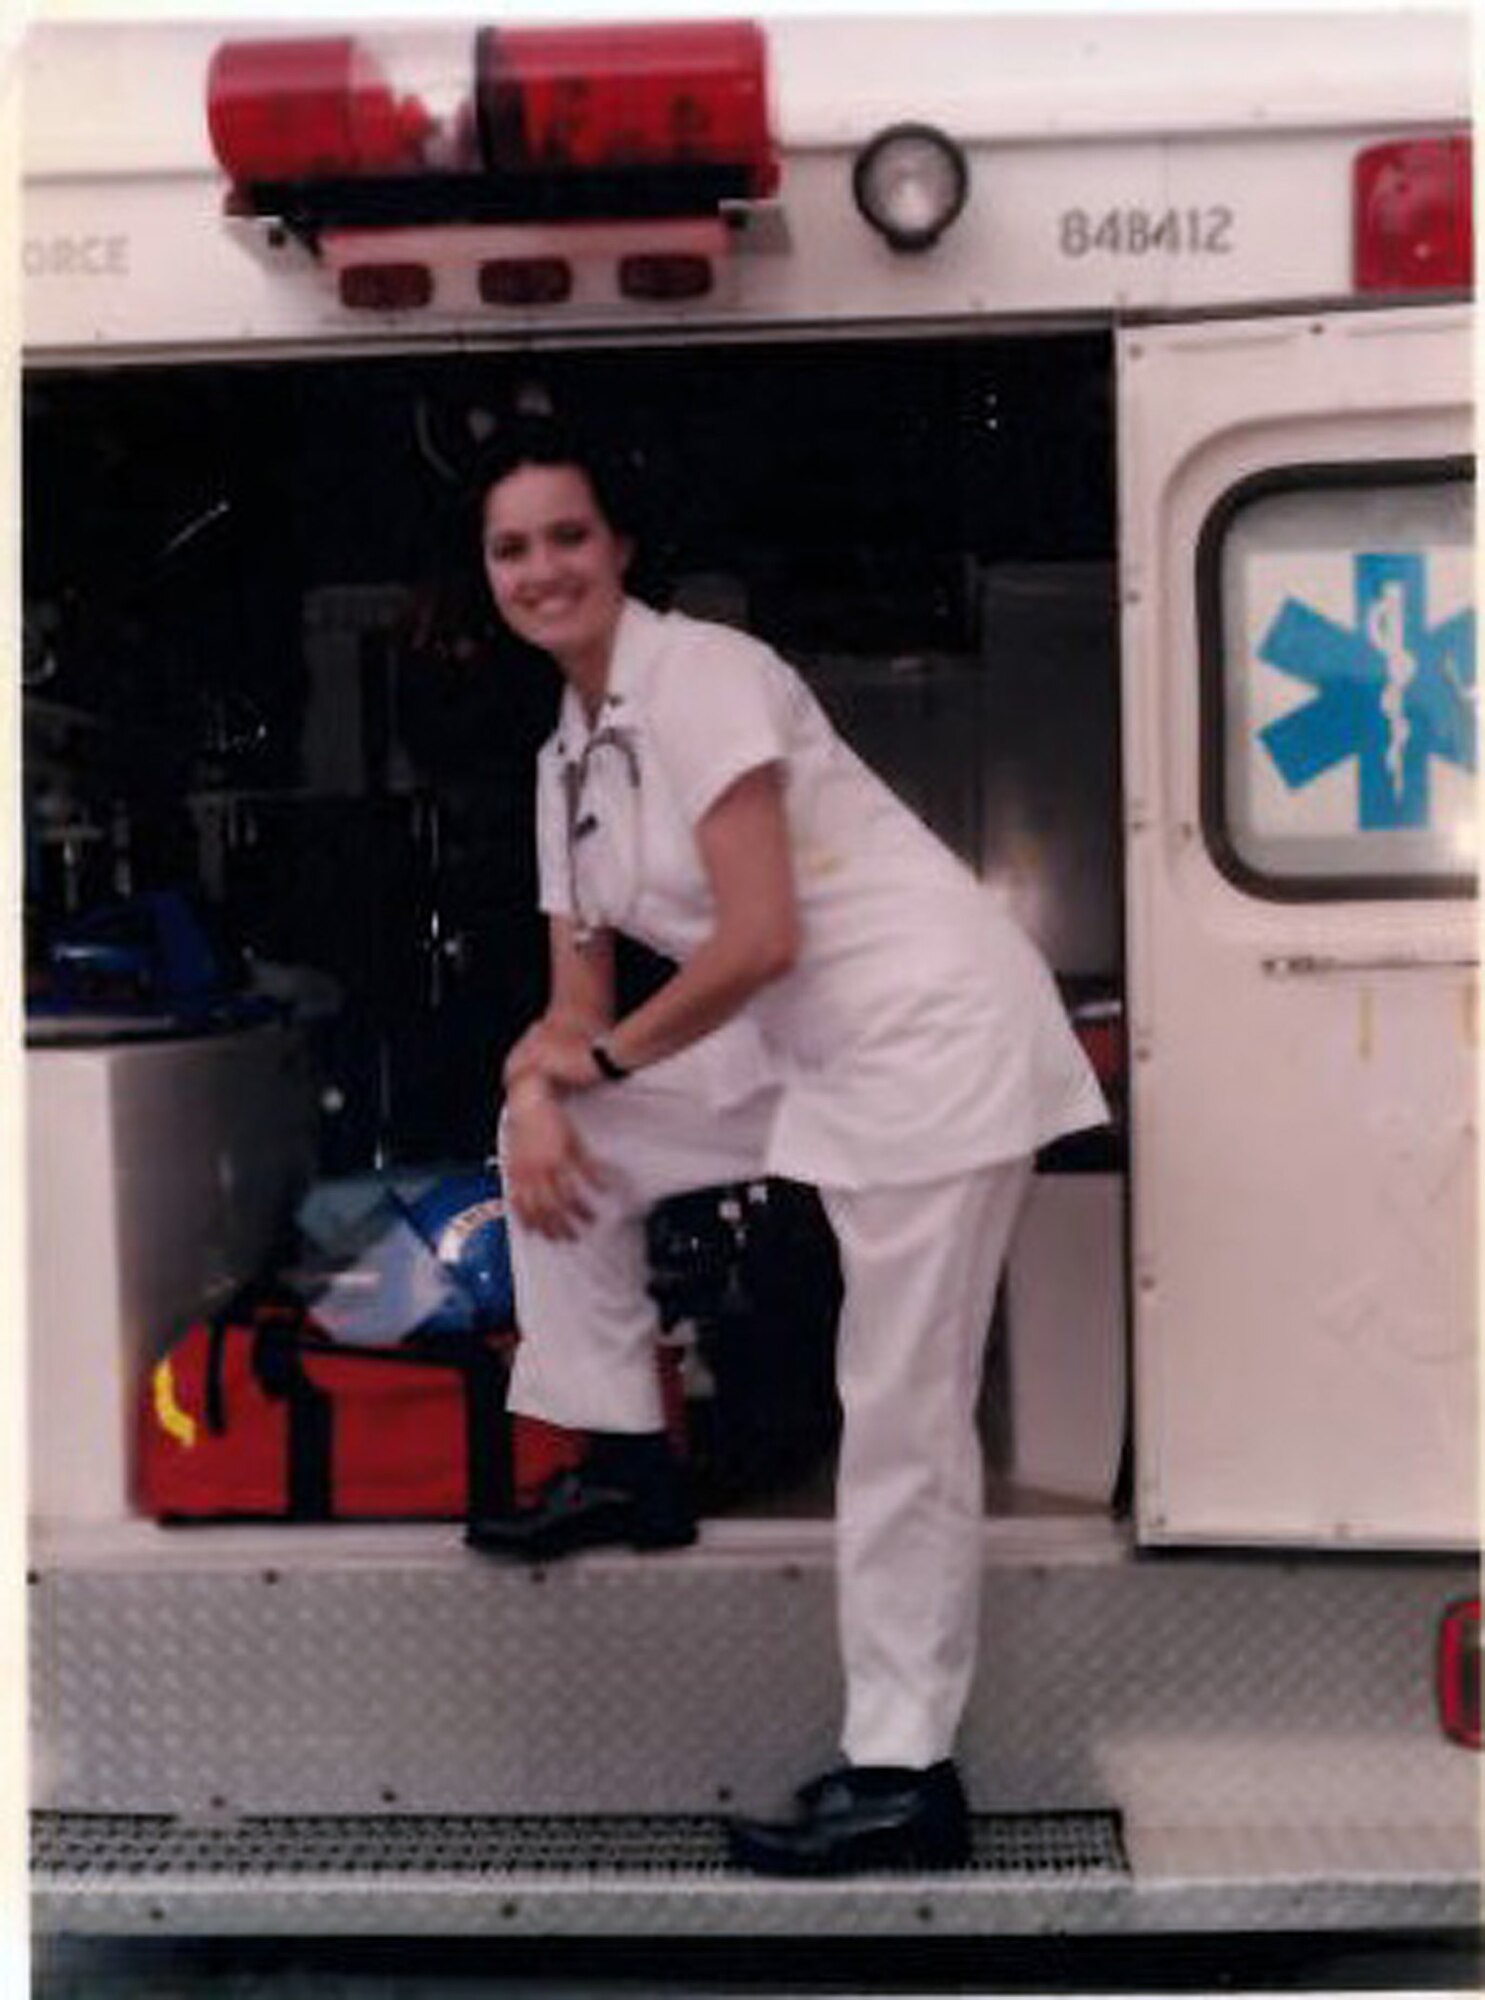 Chief Master Sgt. Paula C. Shawhan joined the Air Force Reserve in 1994, pictured here in 1995, during aerospace medical training at Sheppard Air Force Base, Texas. She is currently assigned as chief of Professional Continuing Education at the Air National Guard's I.G. Brown Training and Education Center in Louisville, Tenn. (Photo courtesy Chief Master Sgt. Paula C. Shawhan)